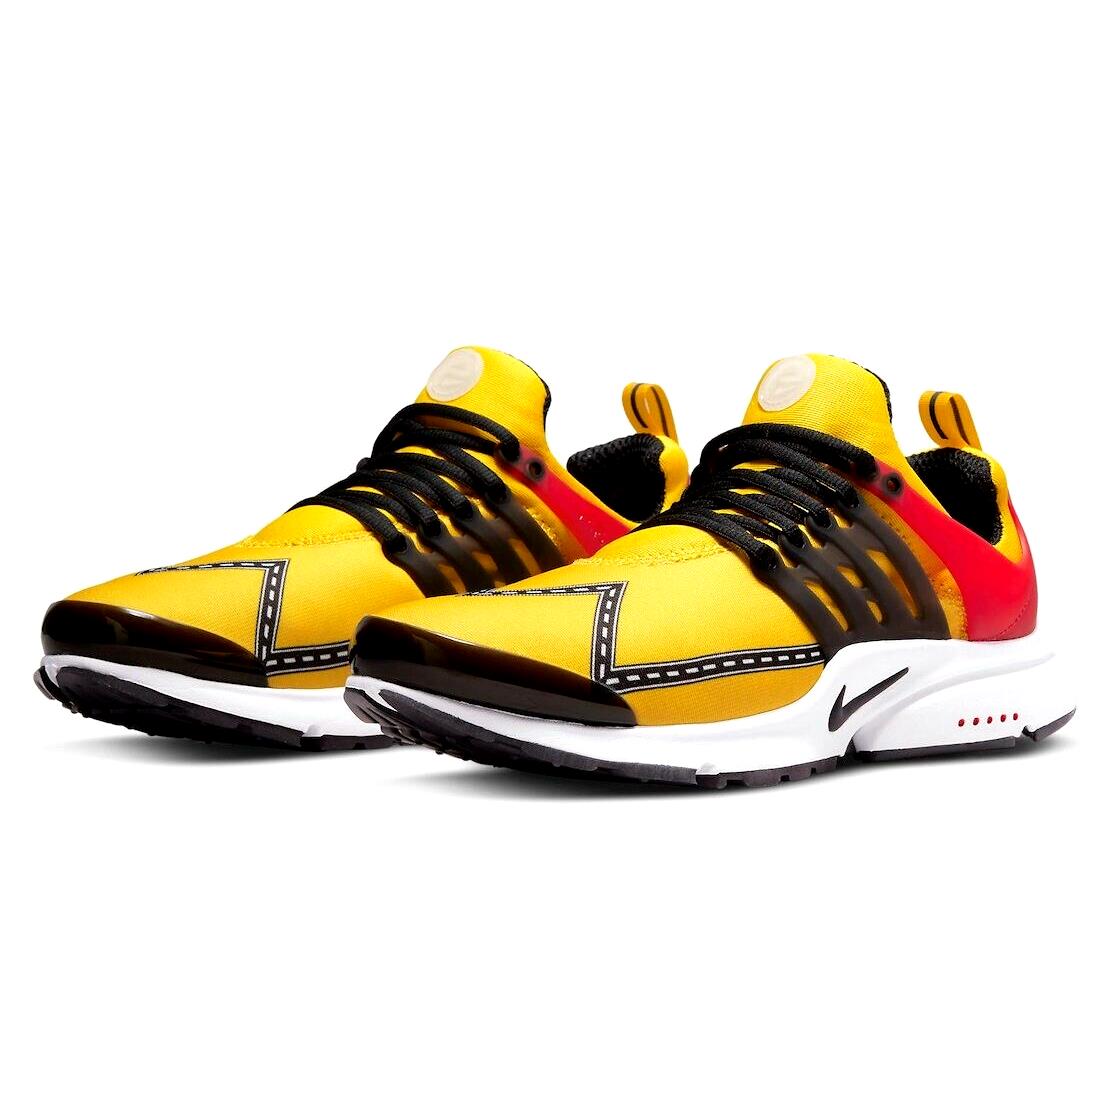 Nike Air Presto Mens Size 10 Sneaker Shoes CT3550 700 Road Race Speed Yellow - Yellow